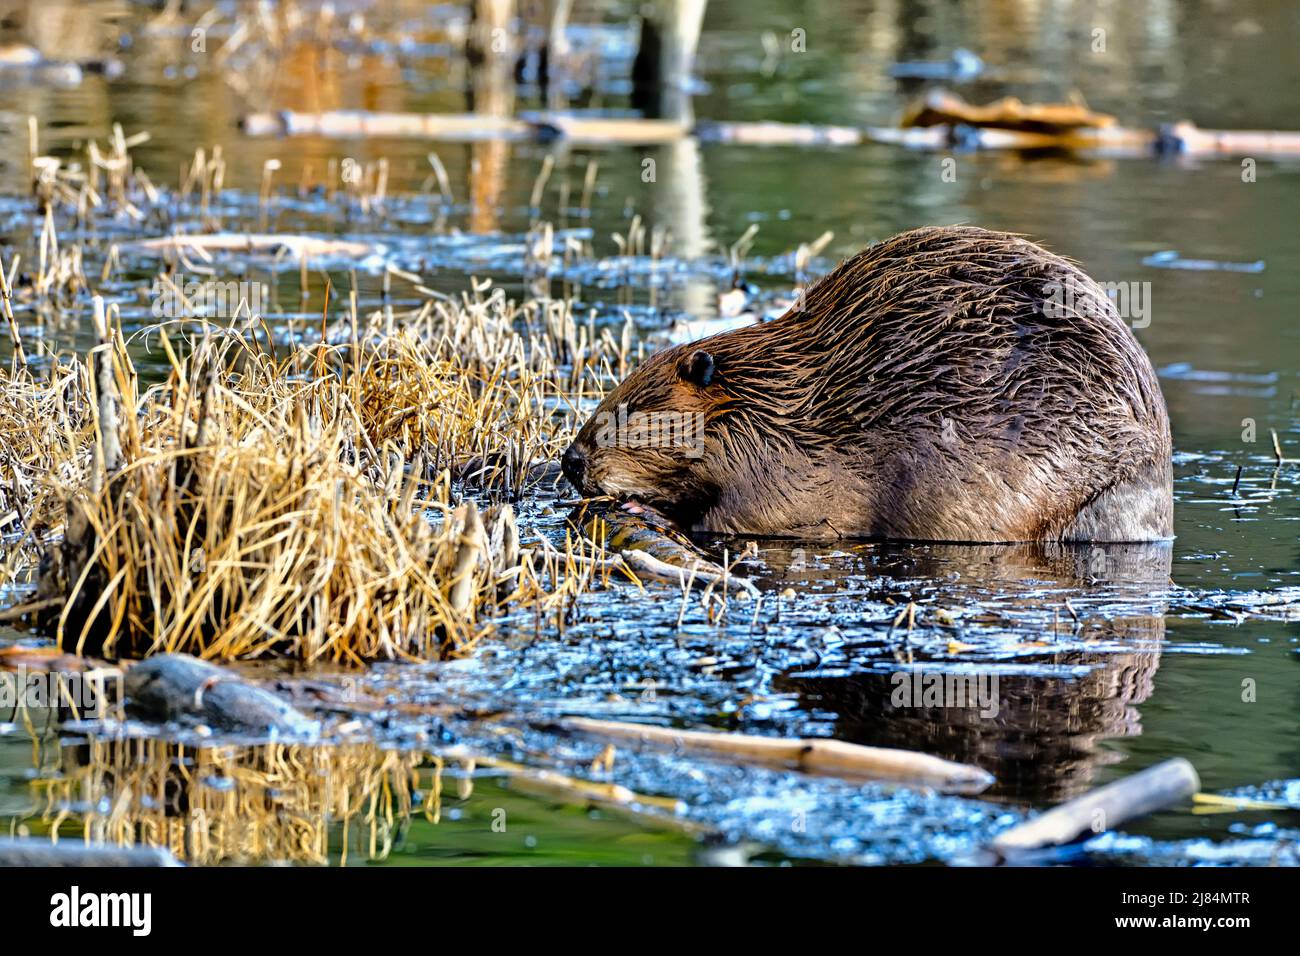 An adult beaver (Castor canadensis), feeding on a tree bark in his beaver pond habitat in rural Alberta Canada. Stock Photo